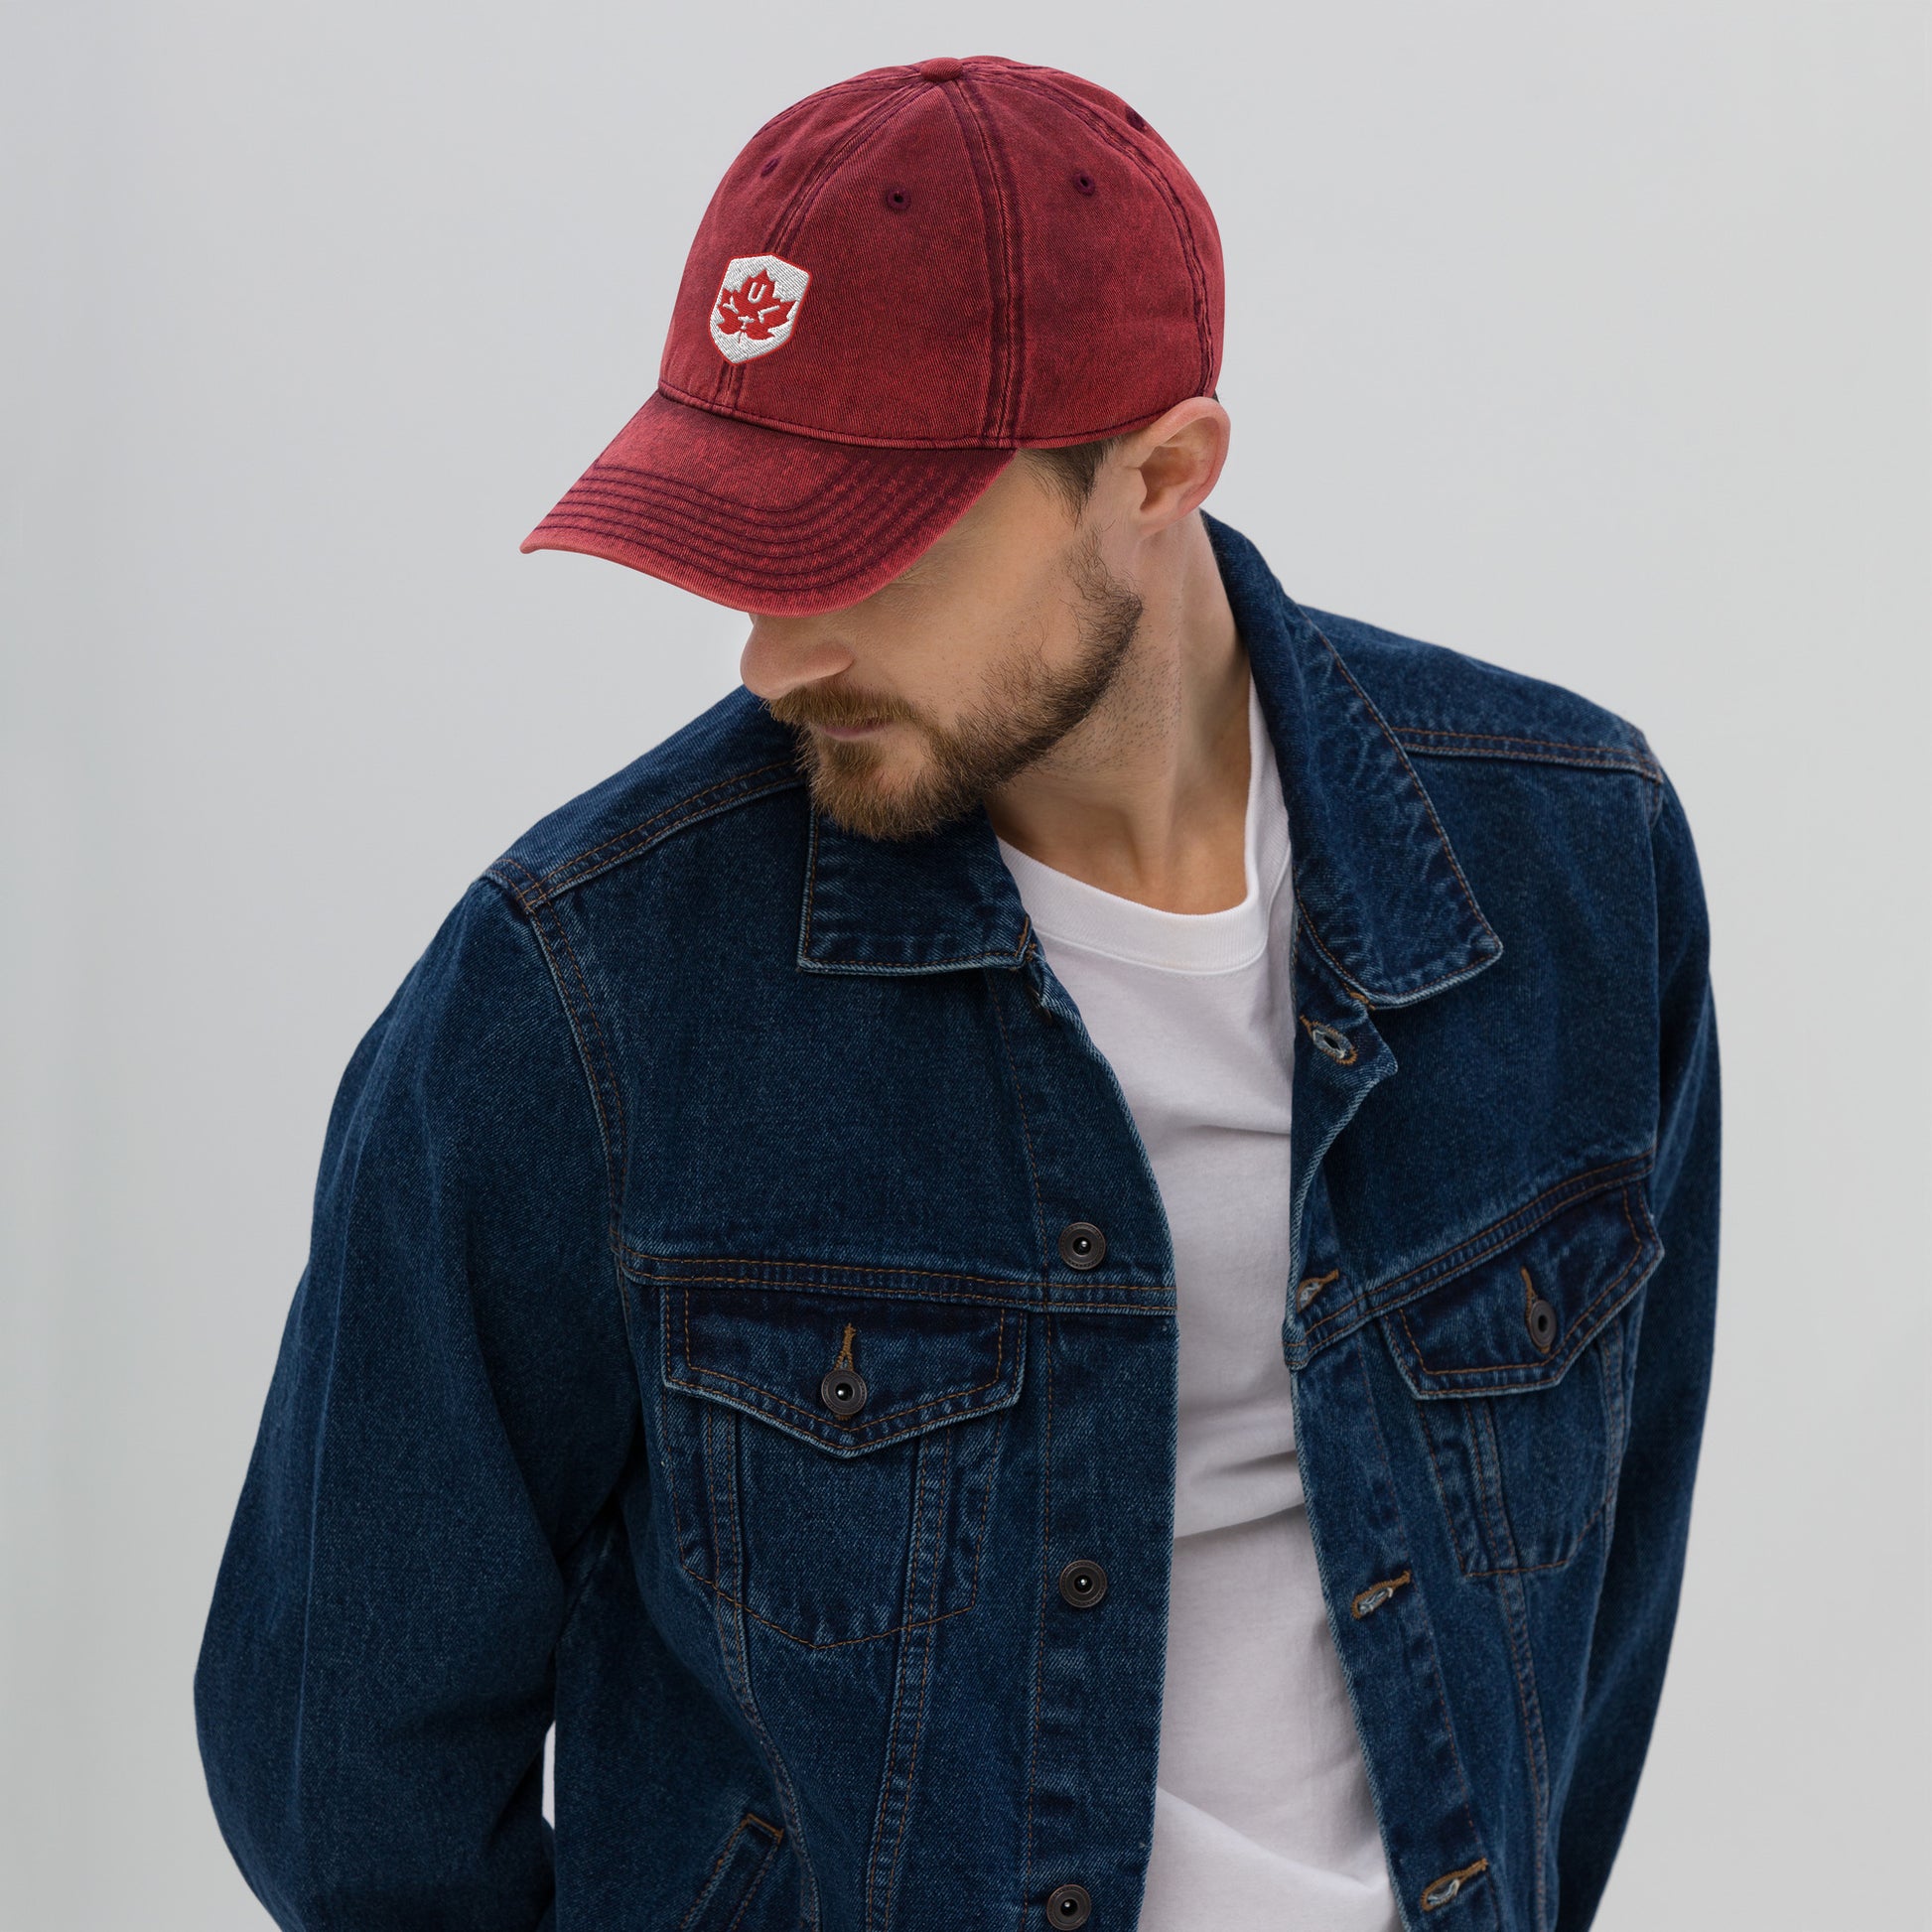 Maple Leaf Twill Cap - Red/White • YUL Montreal • YHM Designs - Image 08